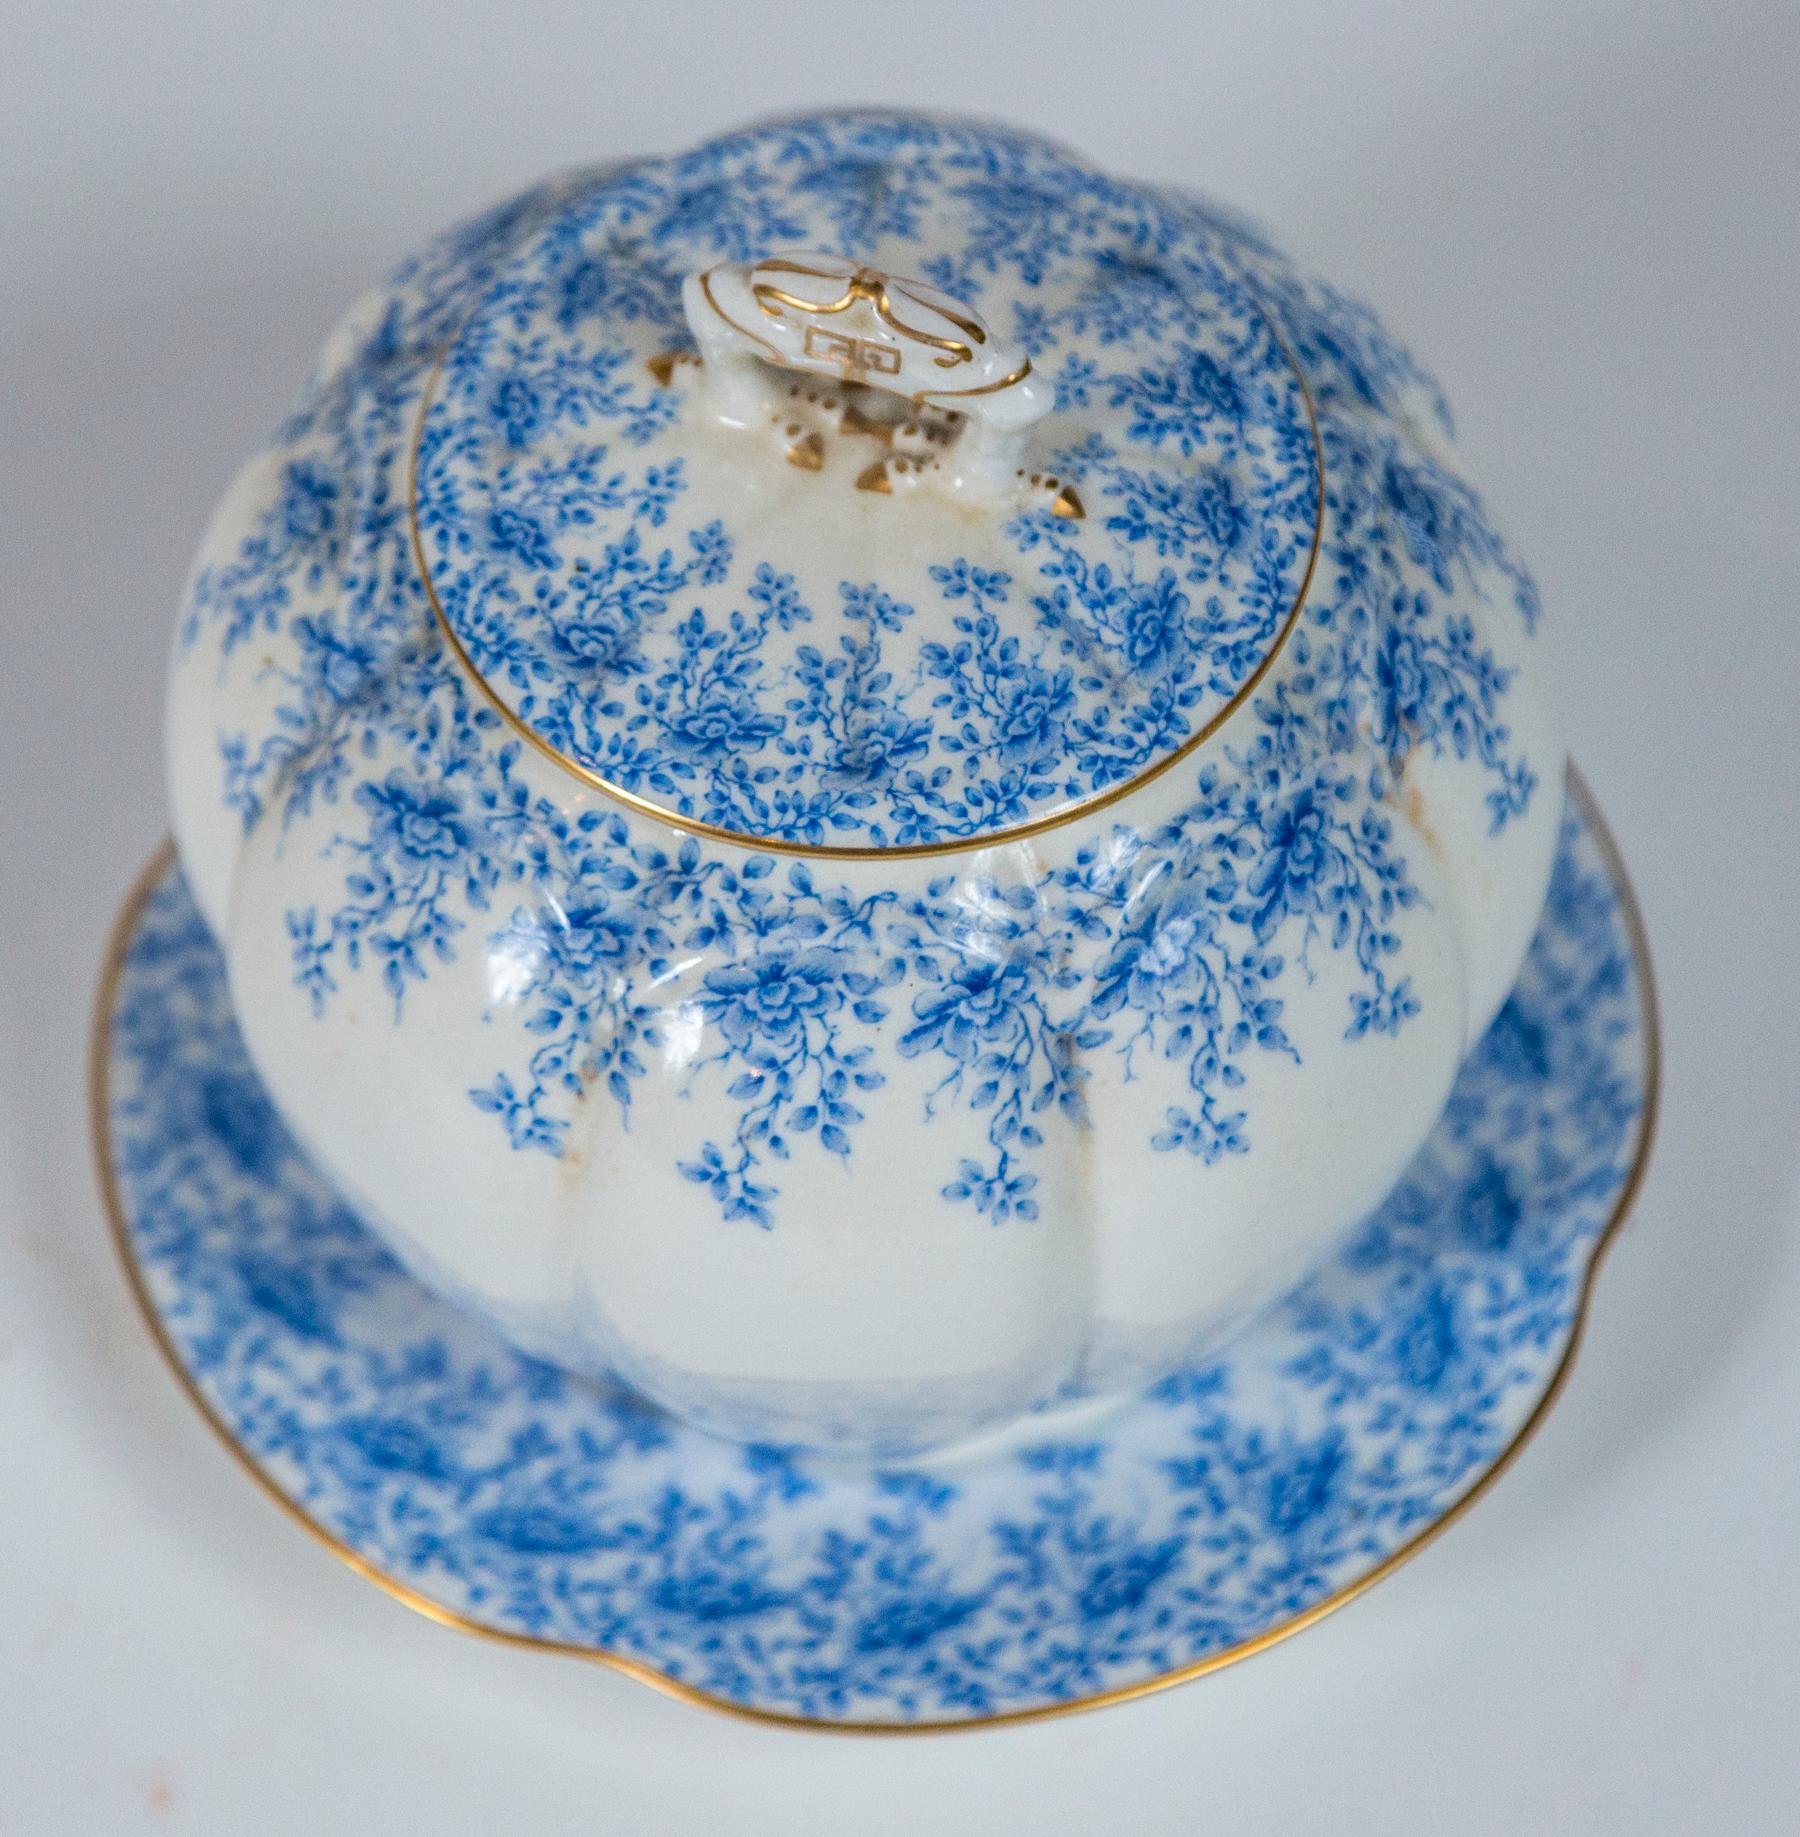 Royal Worcester Biscuit Jar with underplate, England, late 19th Century. Melon shaped jar with blue and white floral design and gold trim.